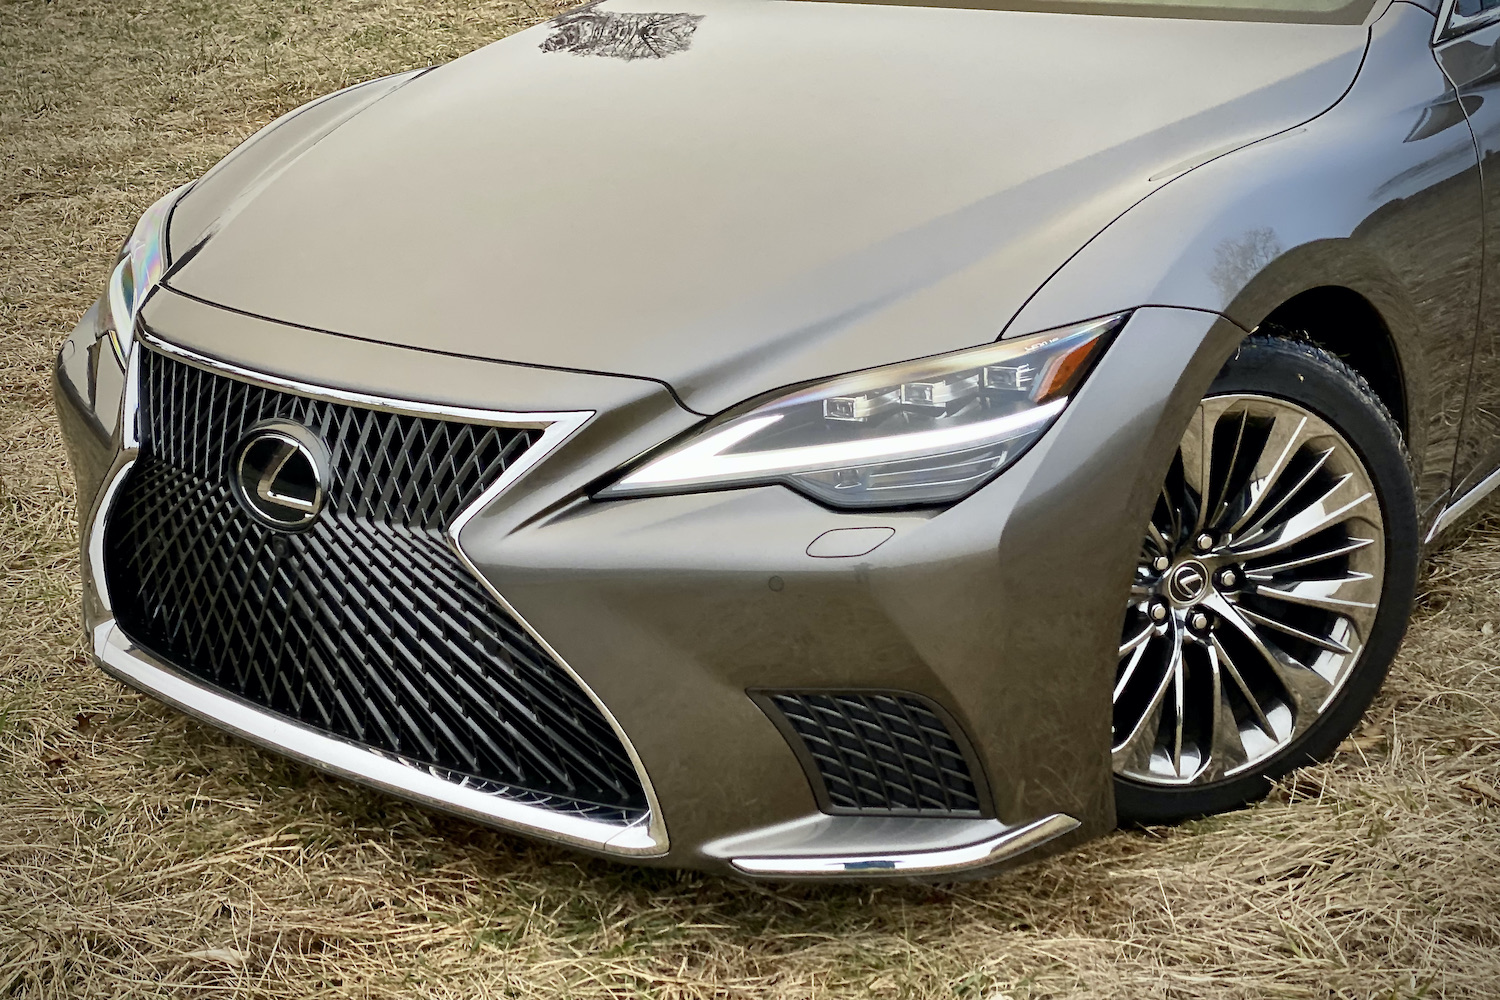 A close-up of the front end of the 2021 Lexus LS500 from driver's side on a grassy field.